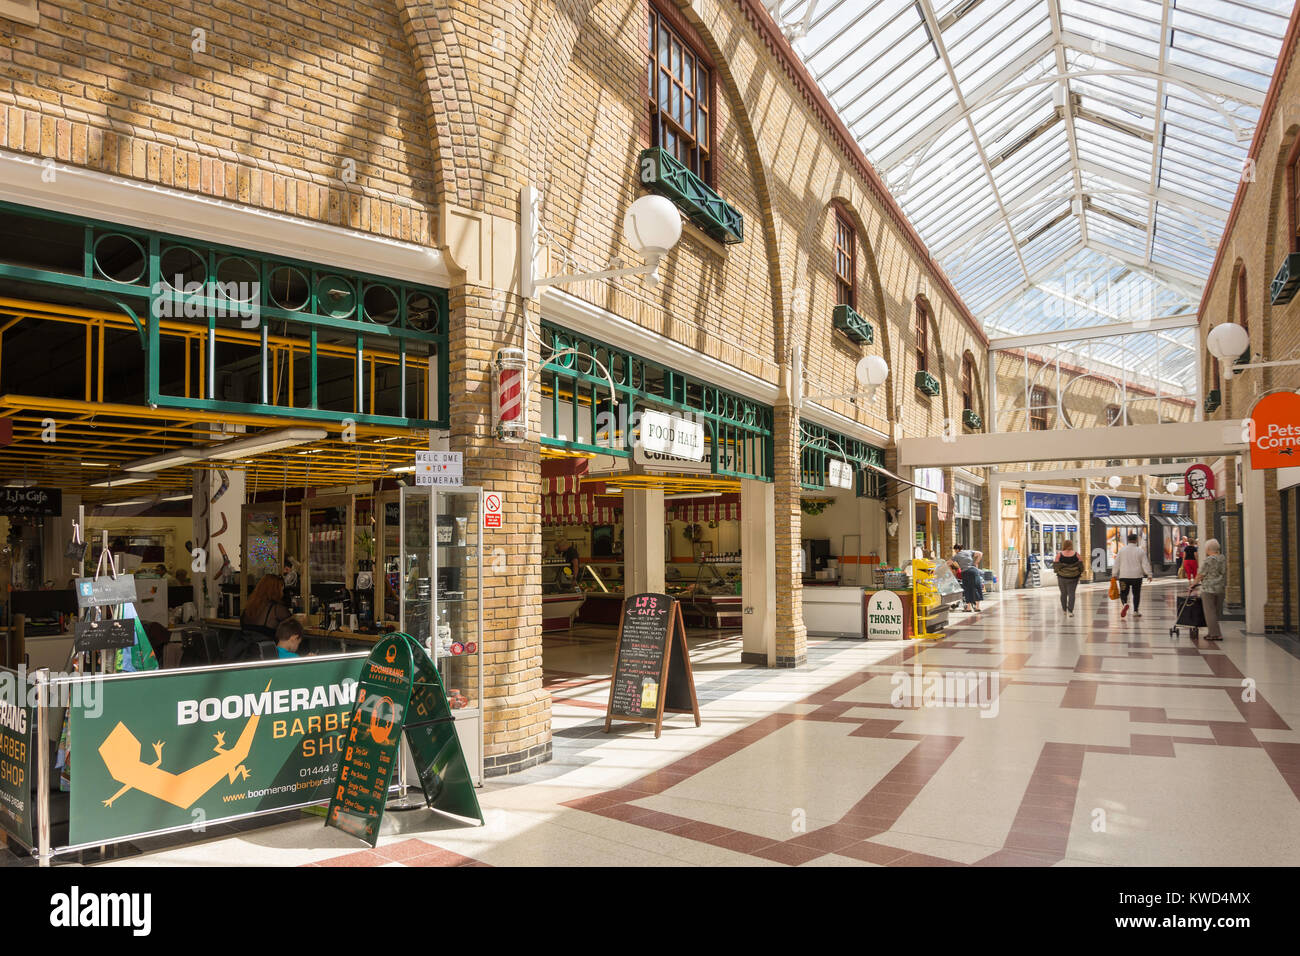 The Market Place Shopping Centre, Market Place, Burgess Hill, West Sussex, England, United Kingdom Stock Photo